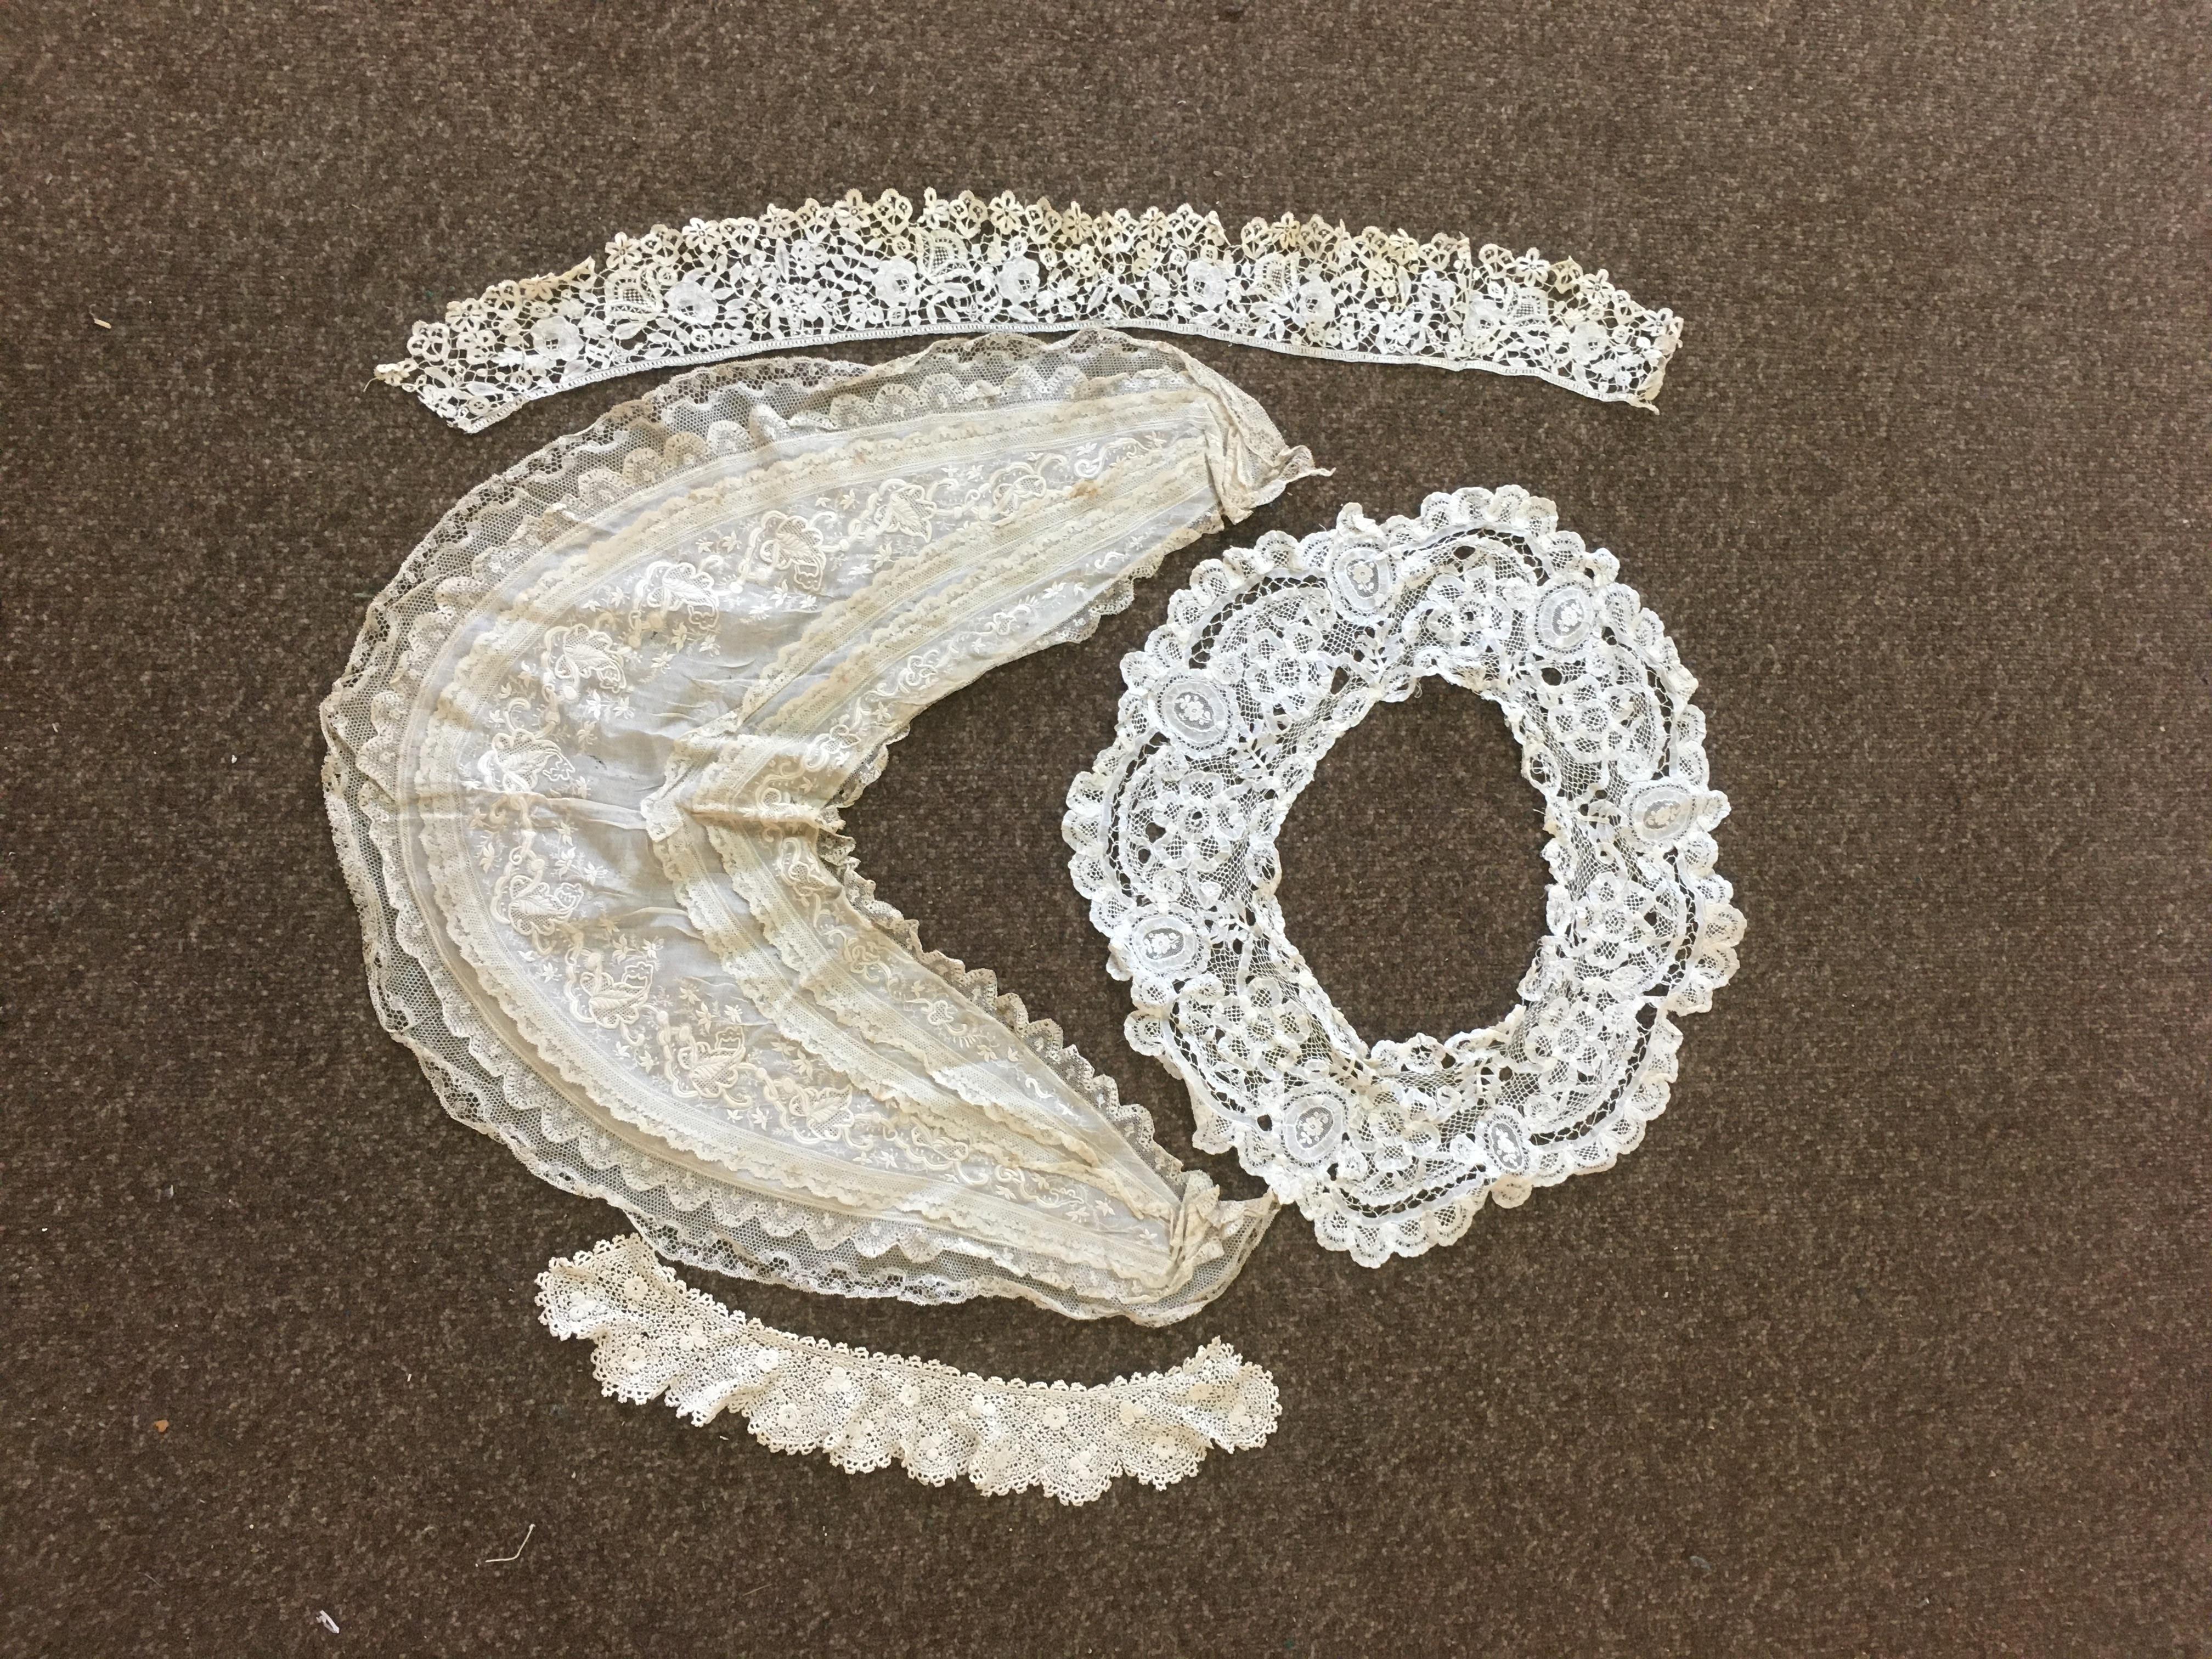 VINTAGE LACE a collection of 19thc lace, comprising collars, a fine shawl, a small applique lace - Image 5 of 8